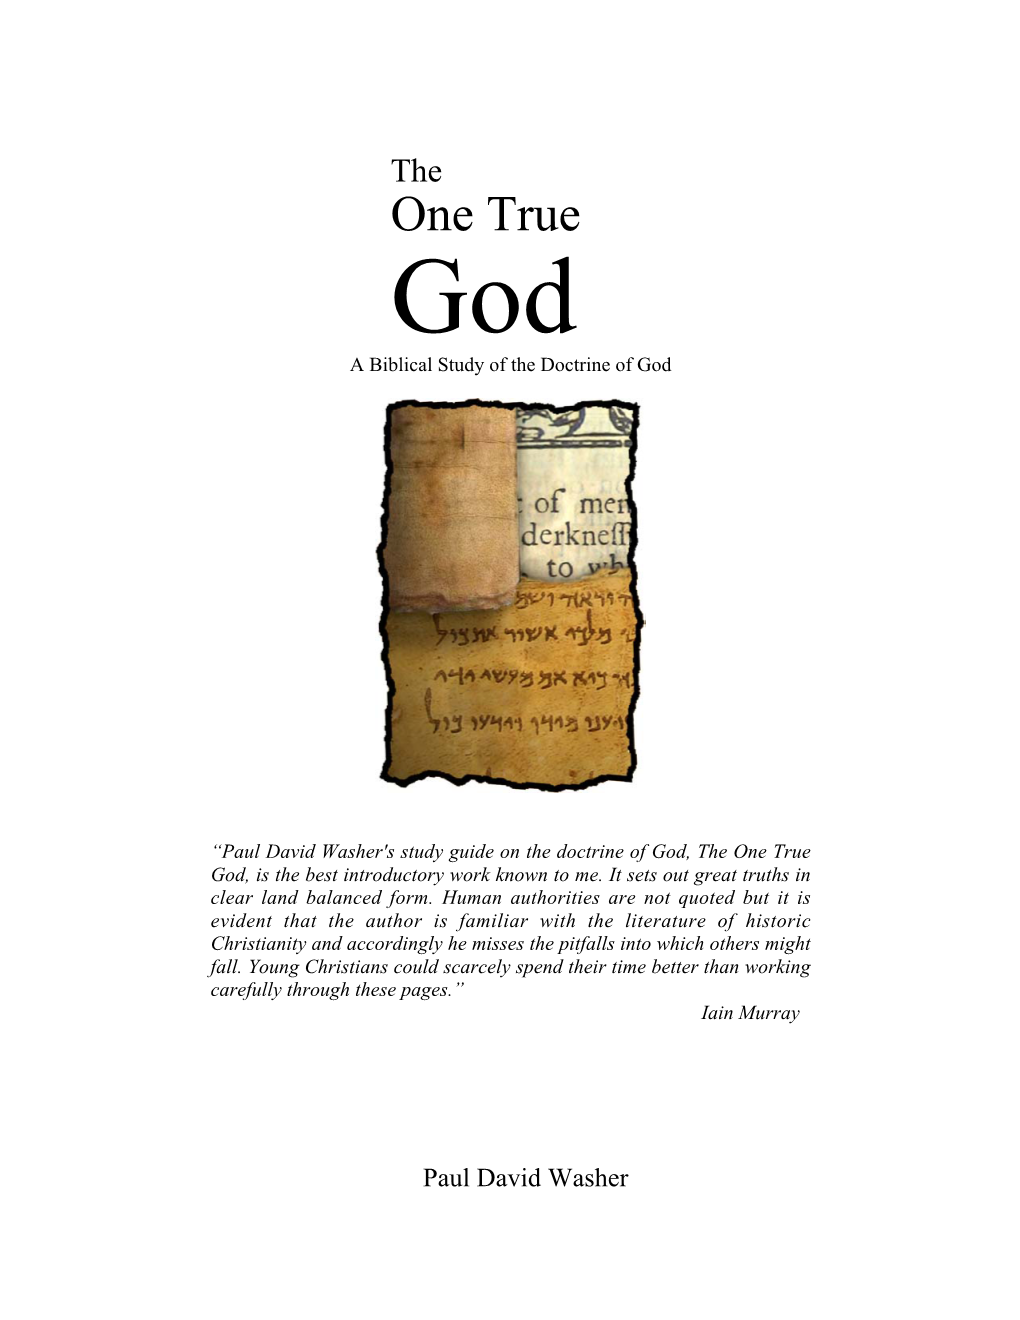 The One True God a Biblical Study of the Doctrine of God